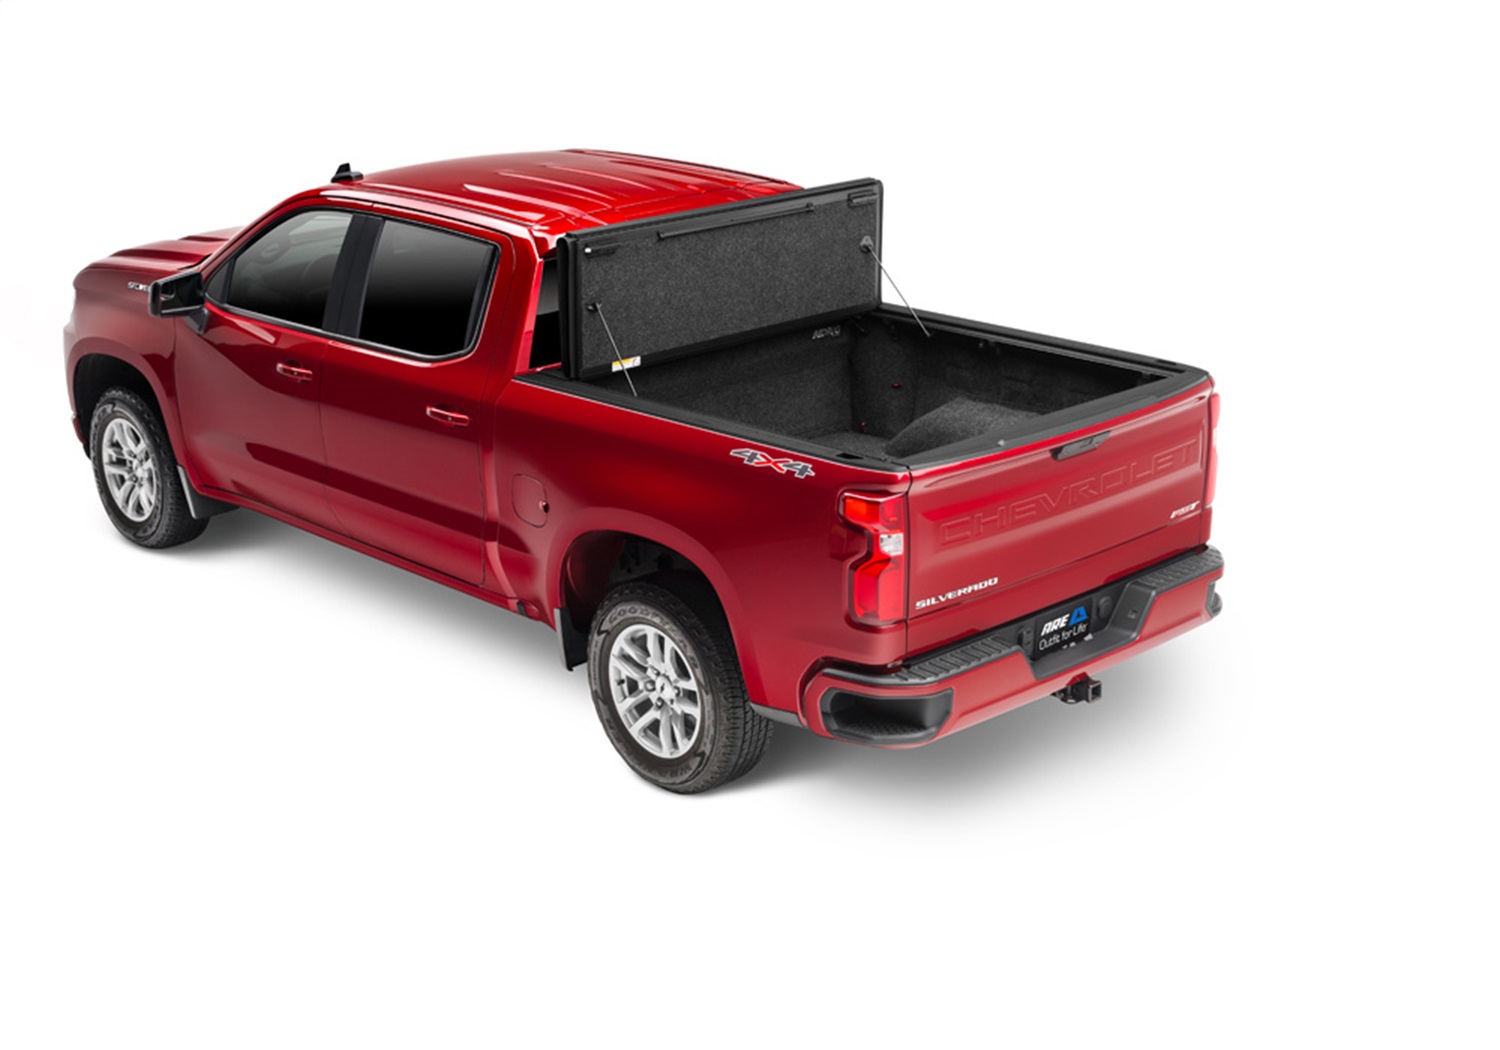 Fusion Tonneau Cover Fits Select Ford F-150 [Bed: 5 ft. 6 in.]